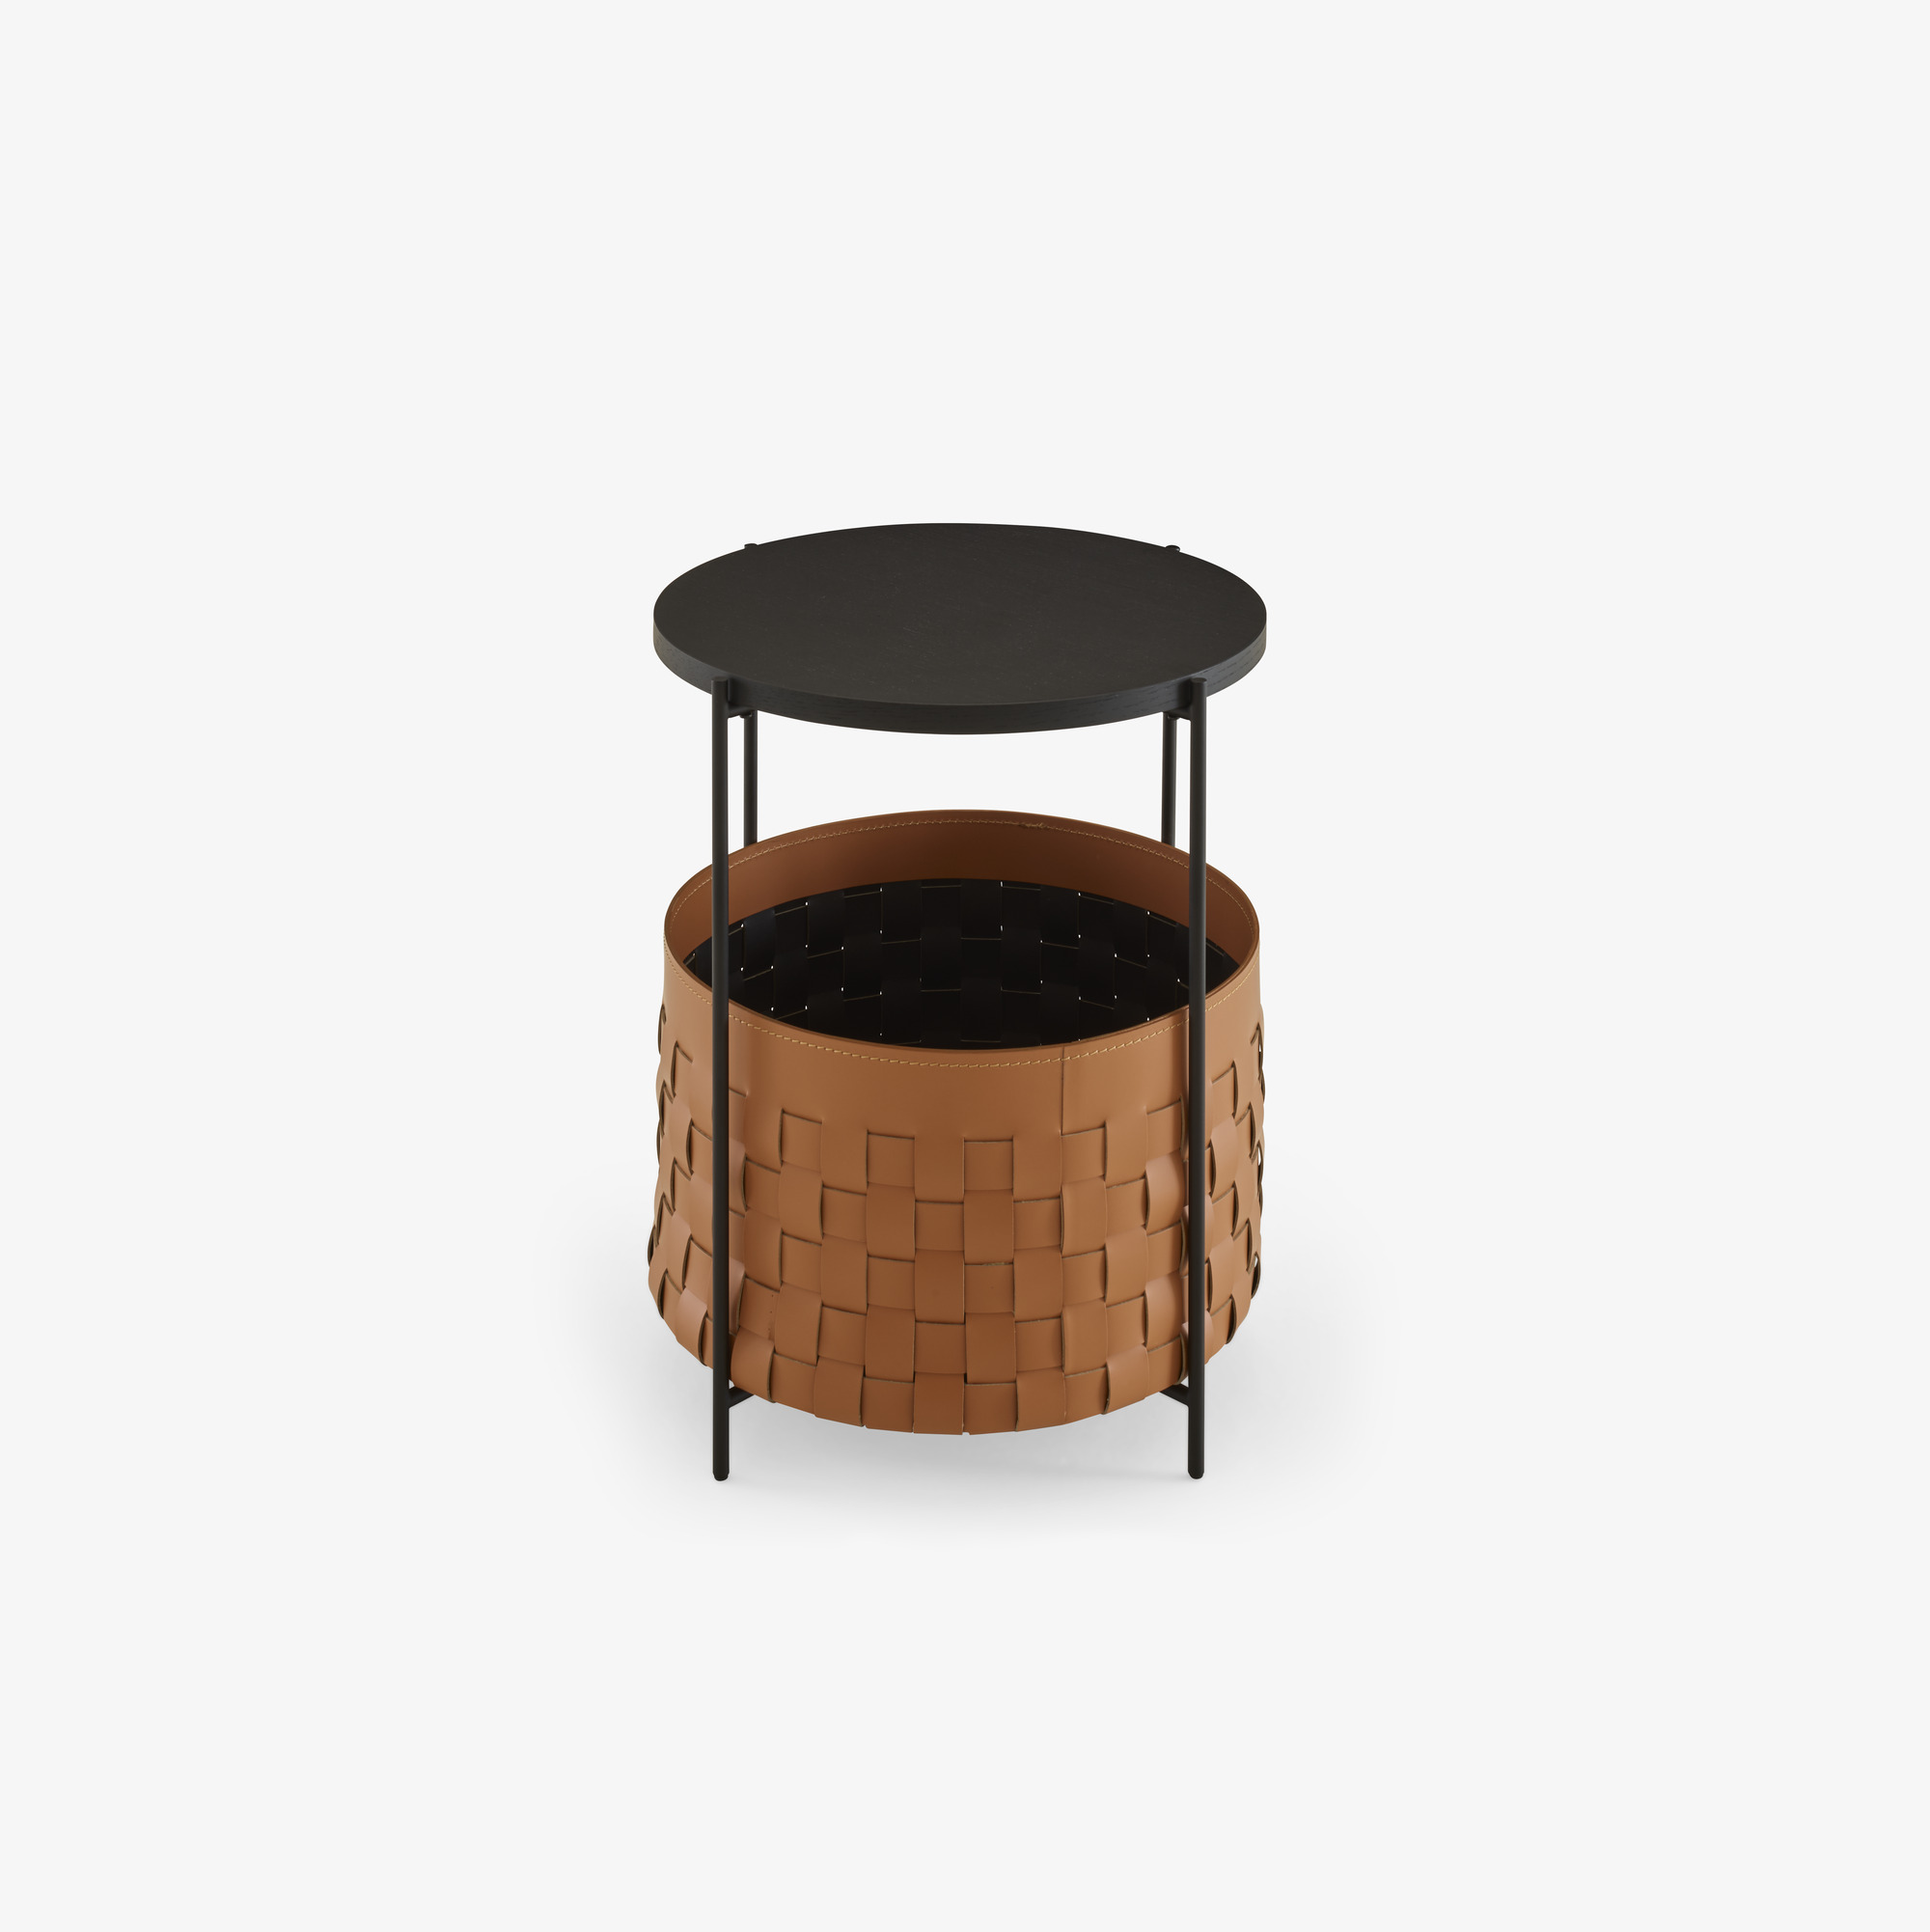 Image BED SIDE TABLE NATURAL 'SYNDERME' LEATHER BLACK INTERIOR